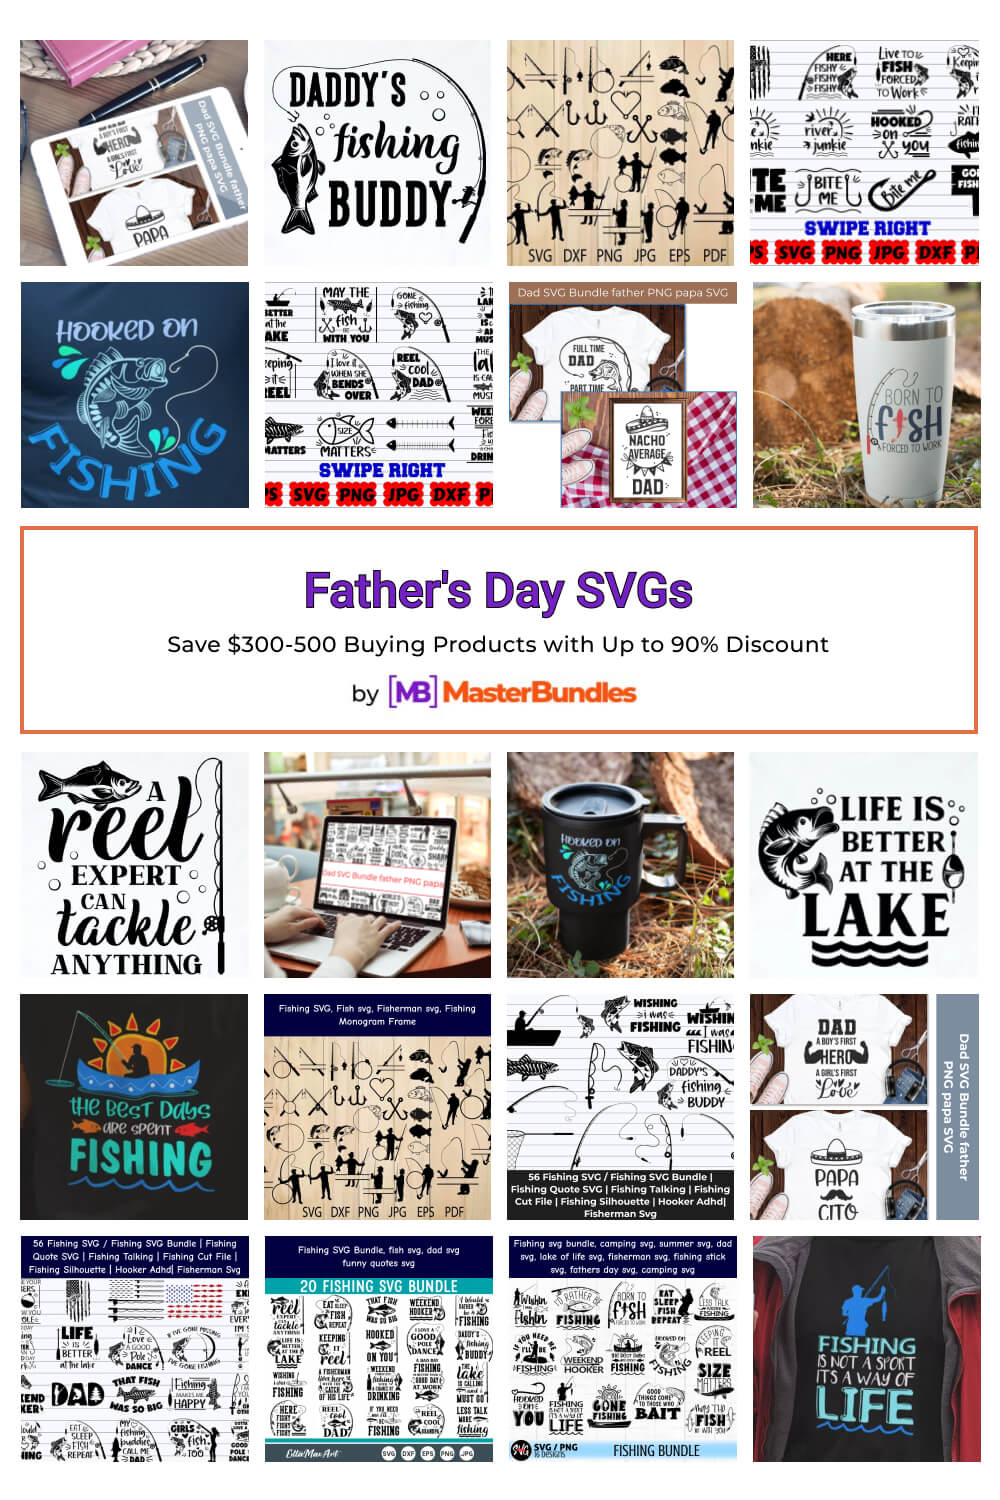 fathers day svgs pinterest image.